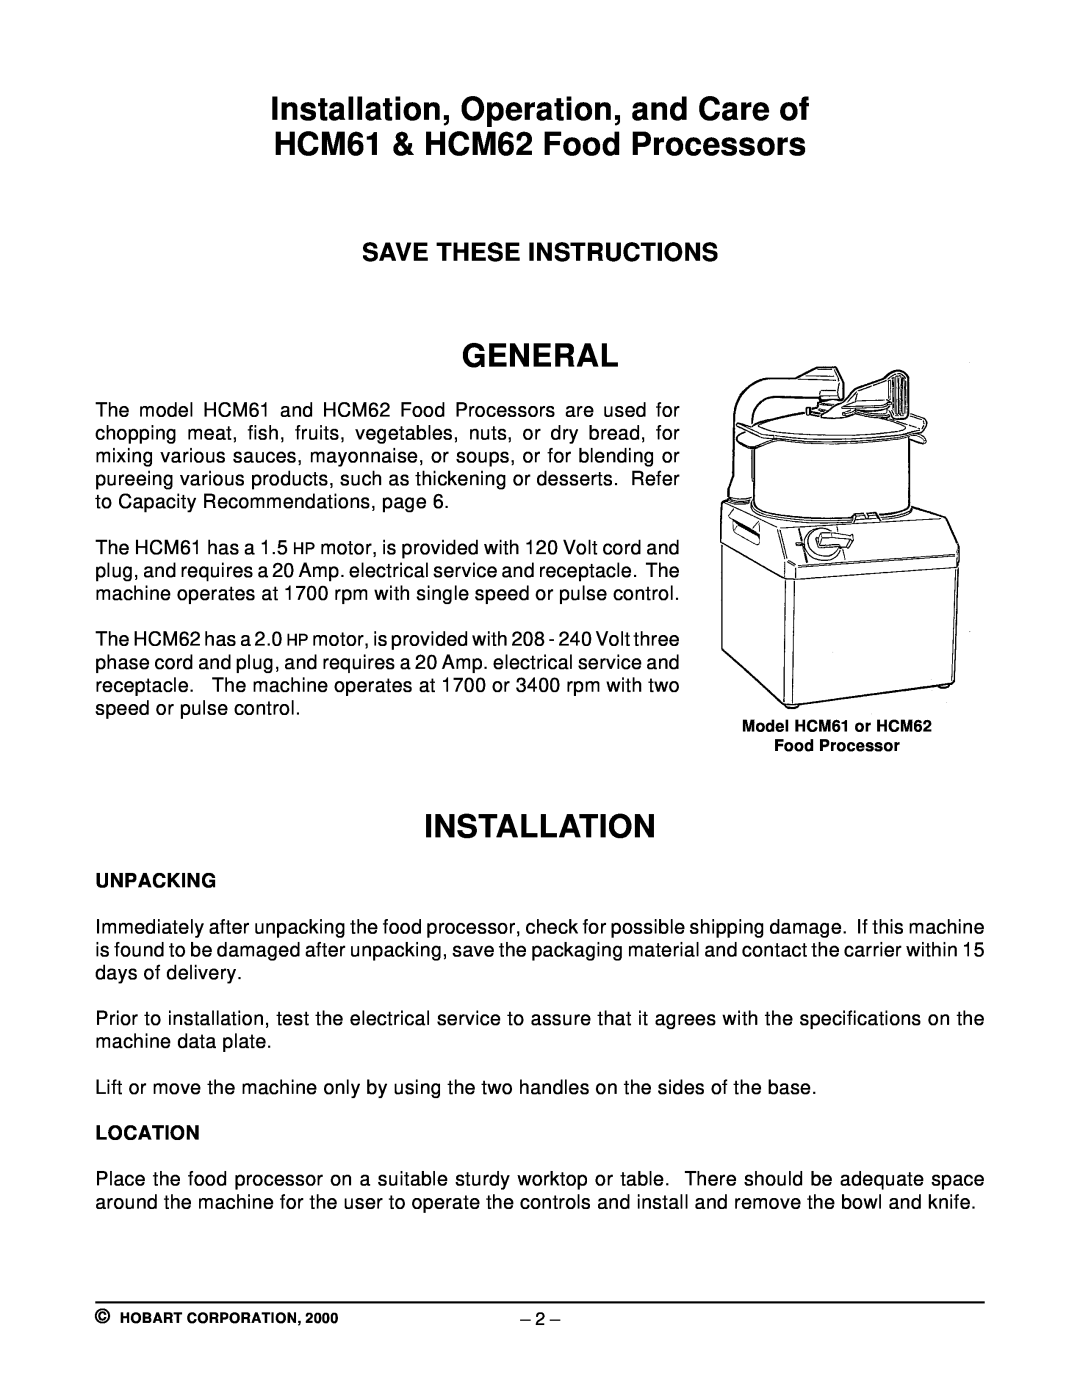 Hobart manual Installation, Operation, and Care of HCM61 & HCM62 Food Processors, General, Save These Instructions 